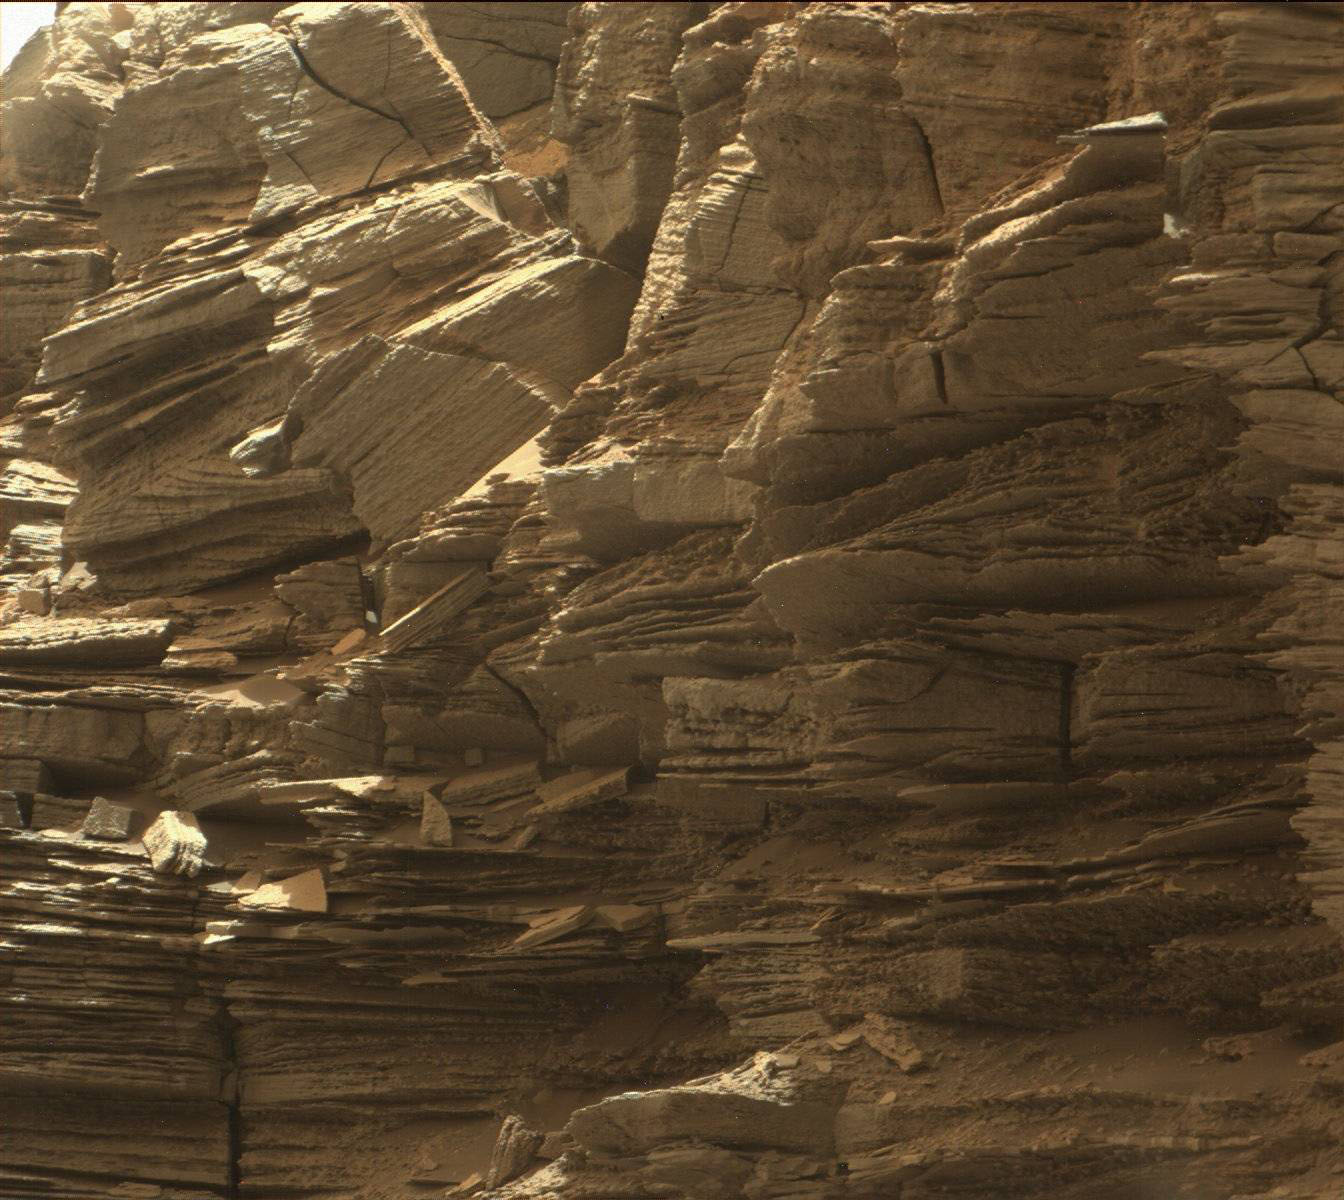 These New Images Of Jagged Rock Formations On Mars Are Just Incredible